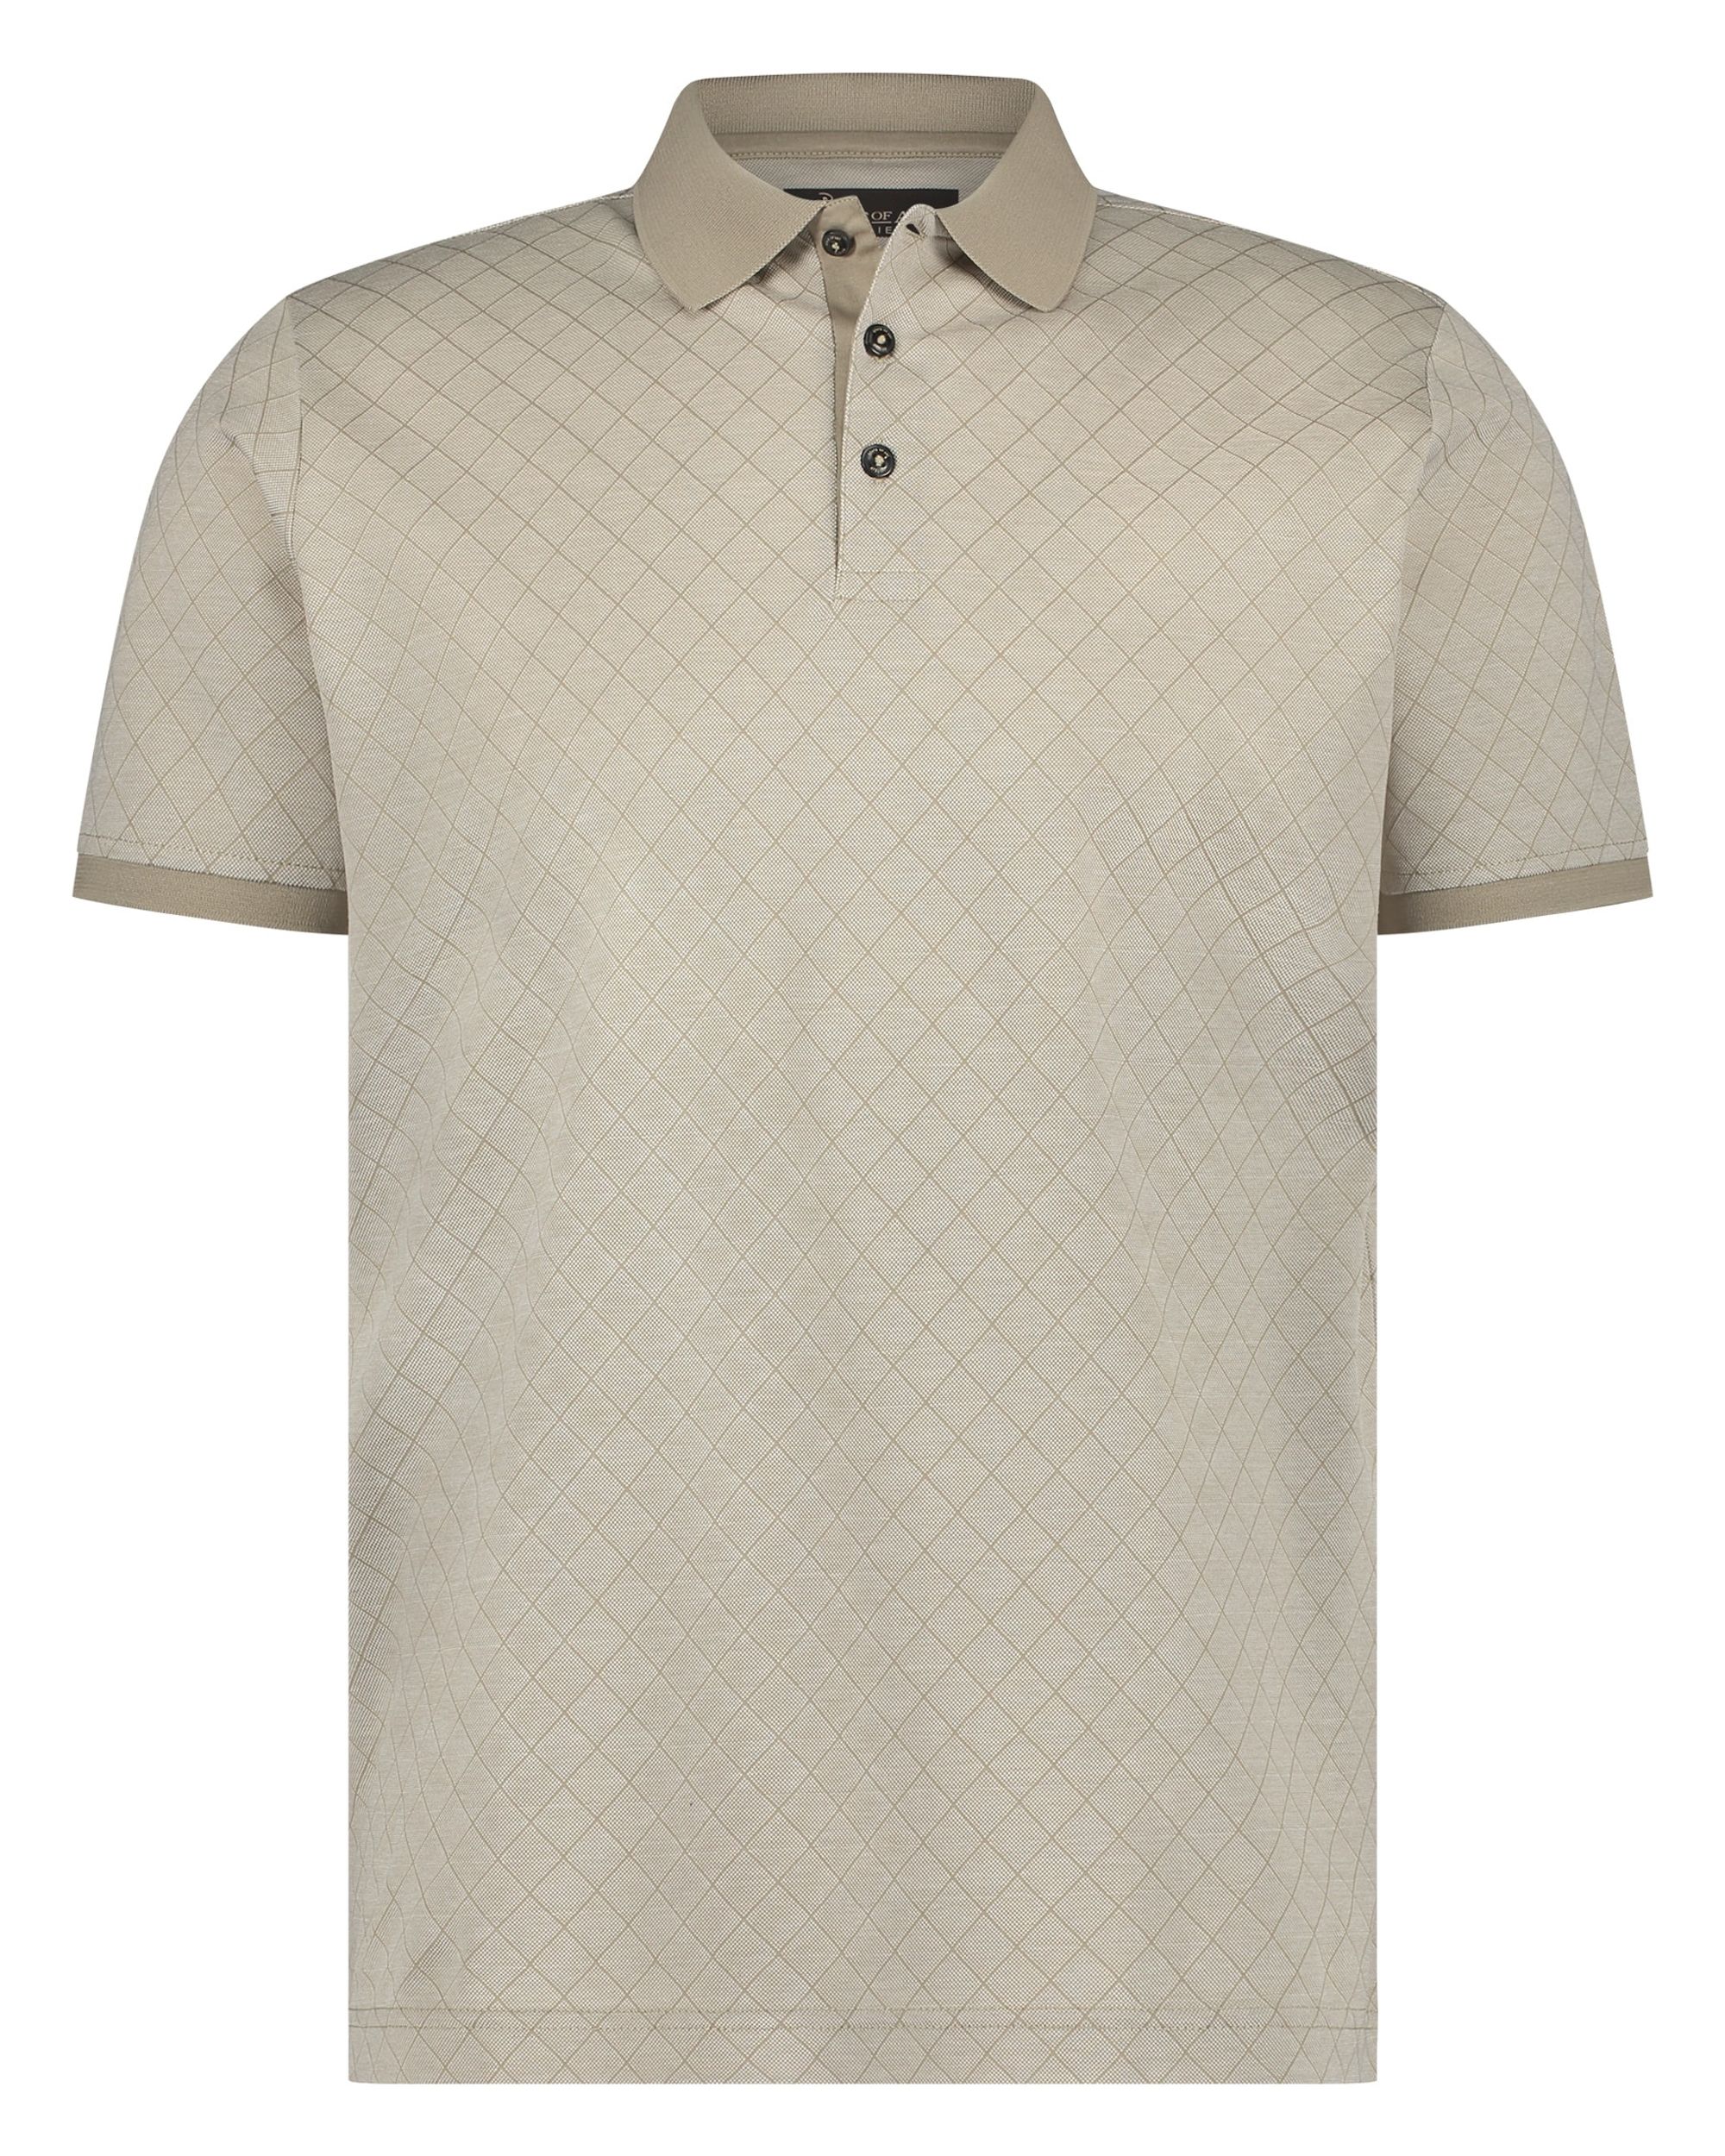 State of Art Polo KM Beige 095068-001-4XL